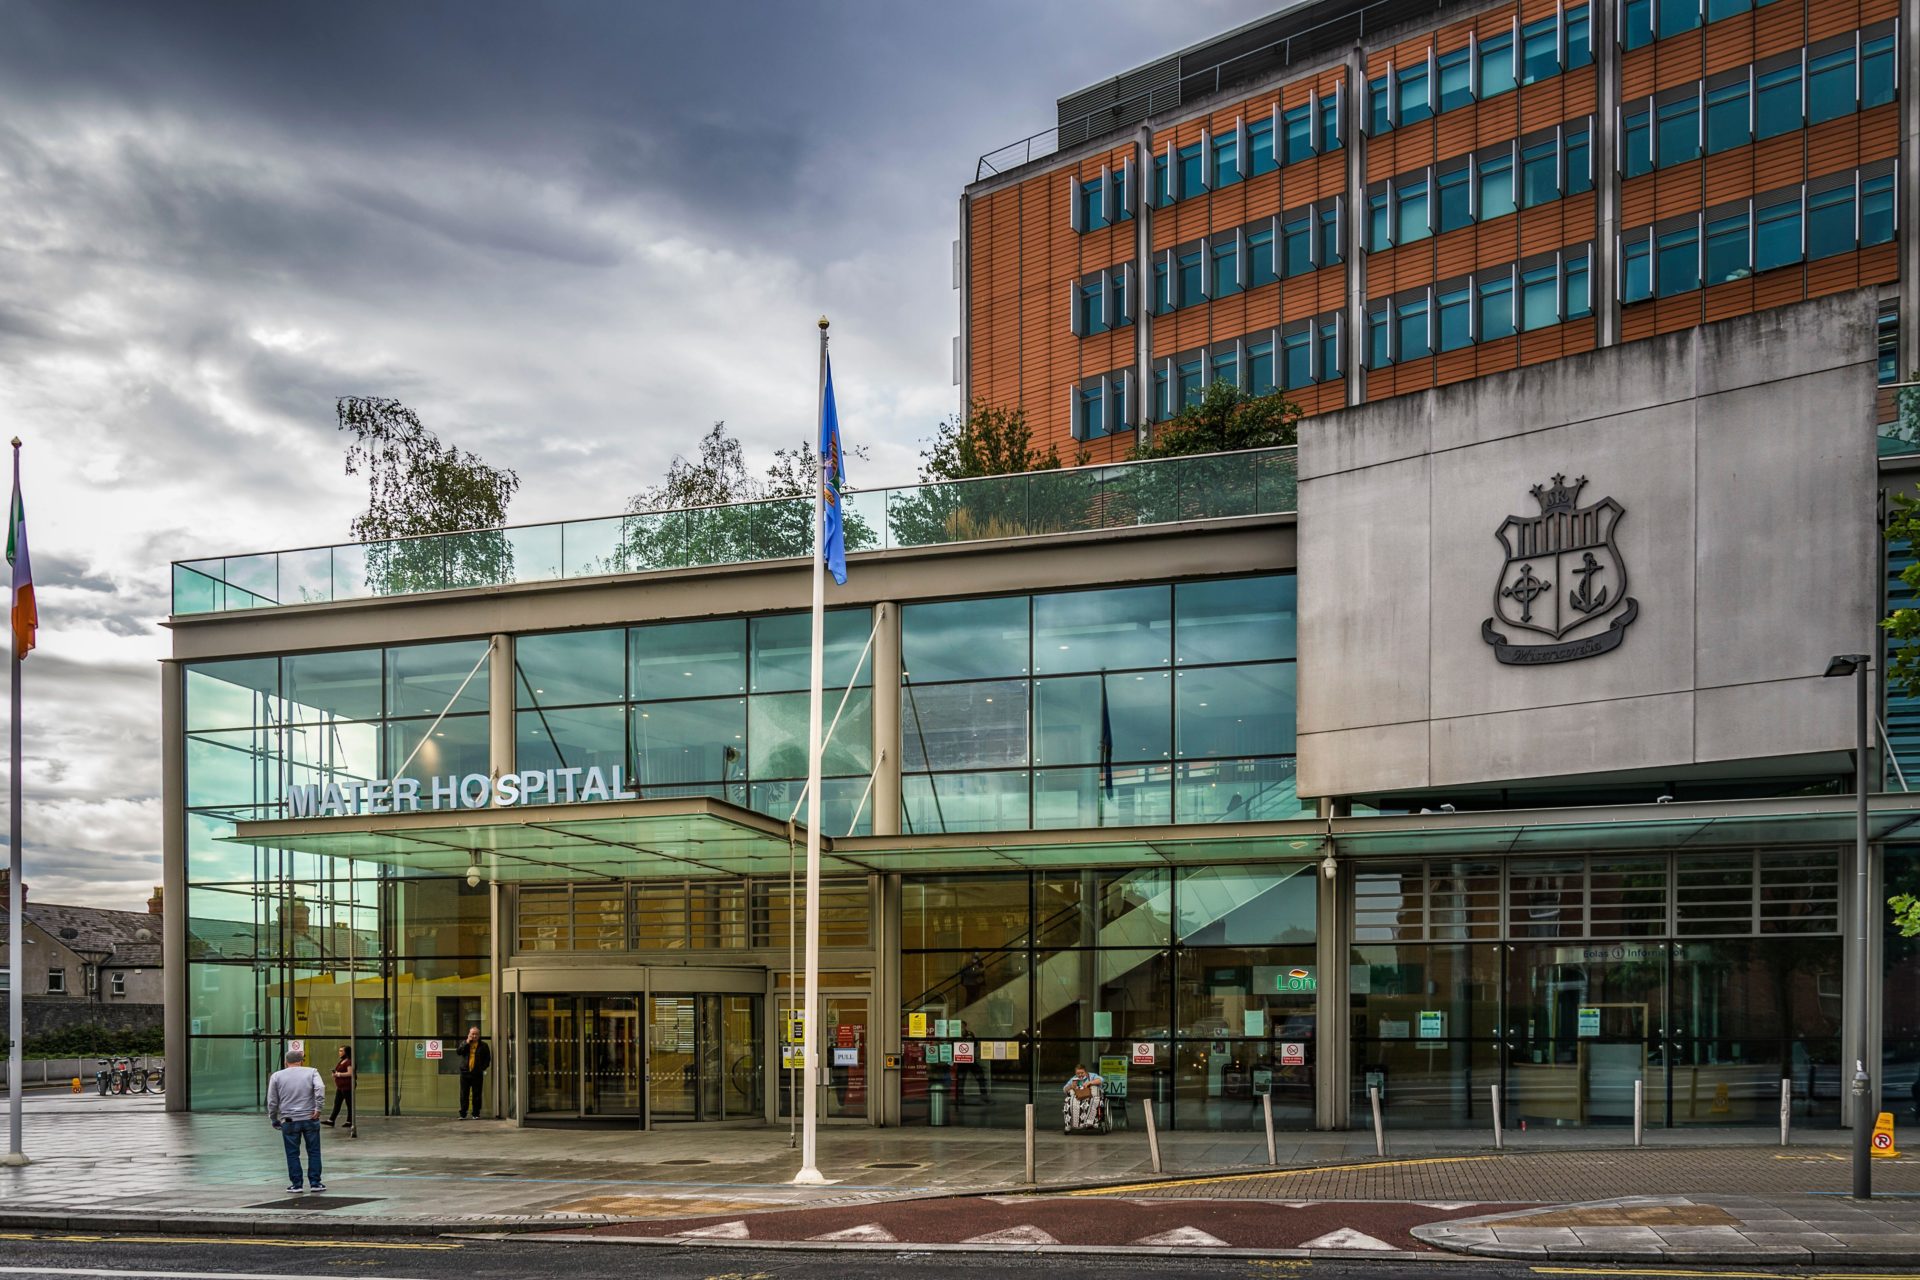 The entrance to the Mater Hospital in Dublin. Image: Vitalli / Alamy